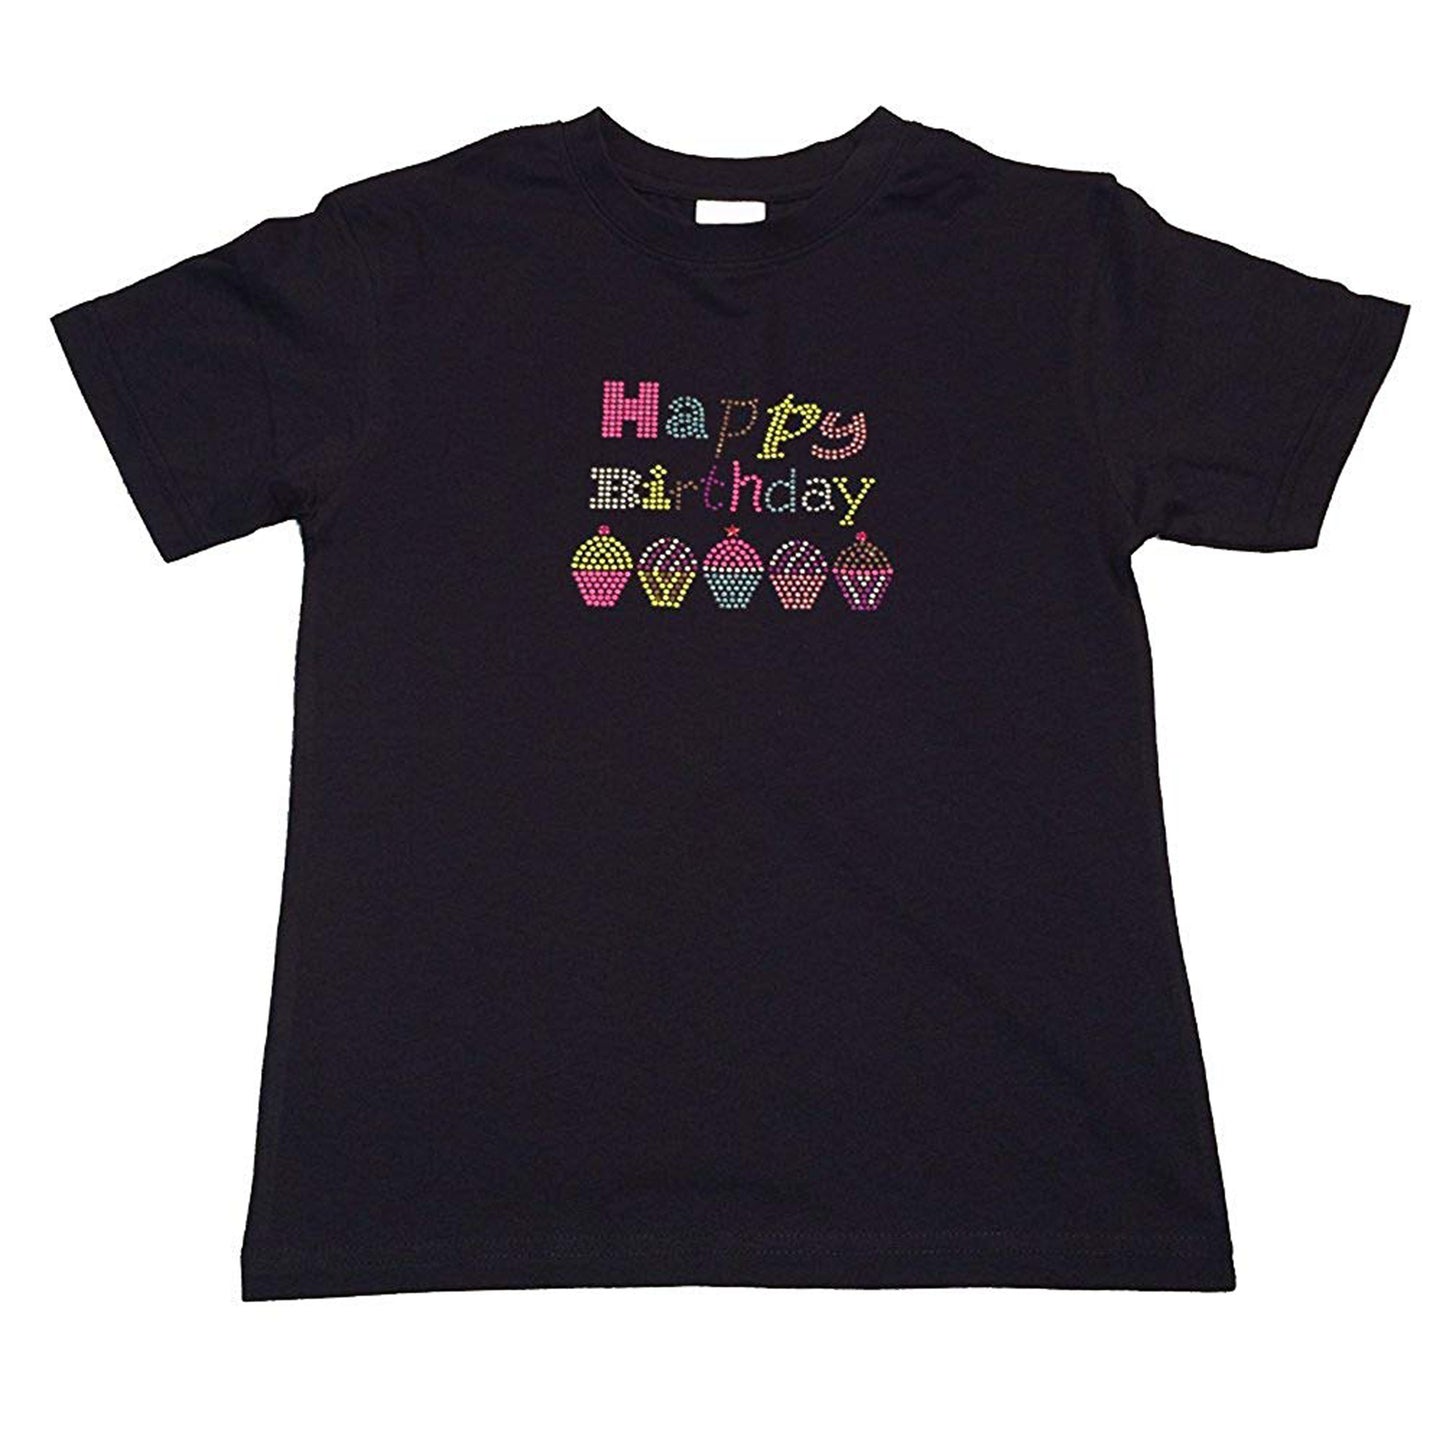 Girls Rhinestud T-Shirt " Colorful Happy Birthday " Size 3 to 14 Available, Neon